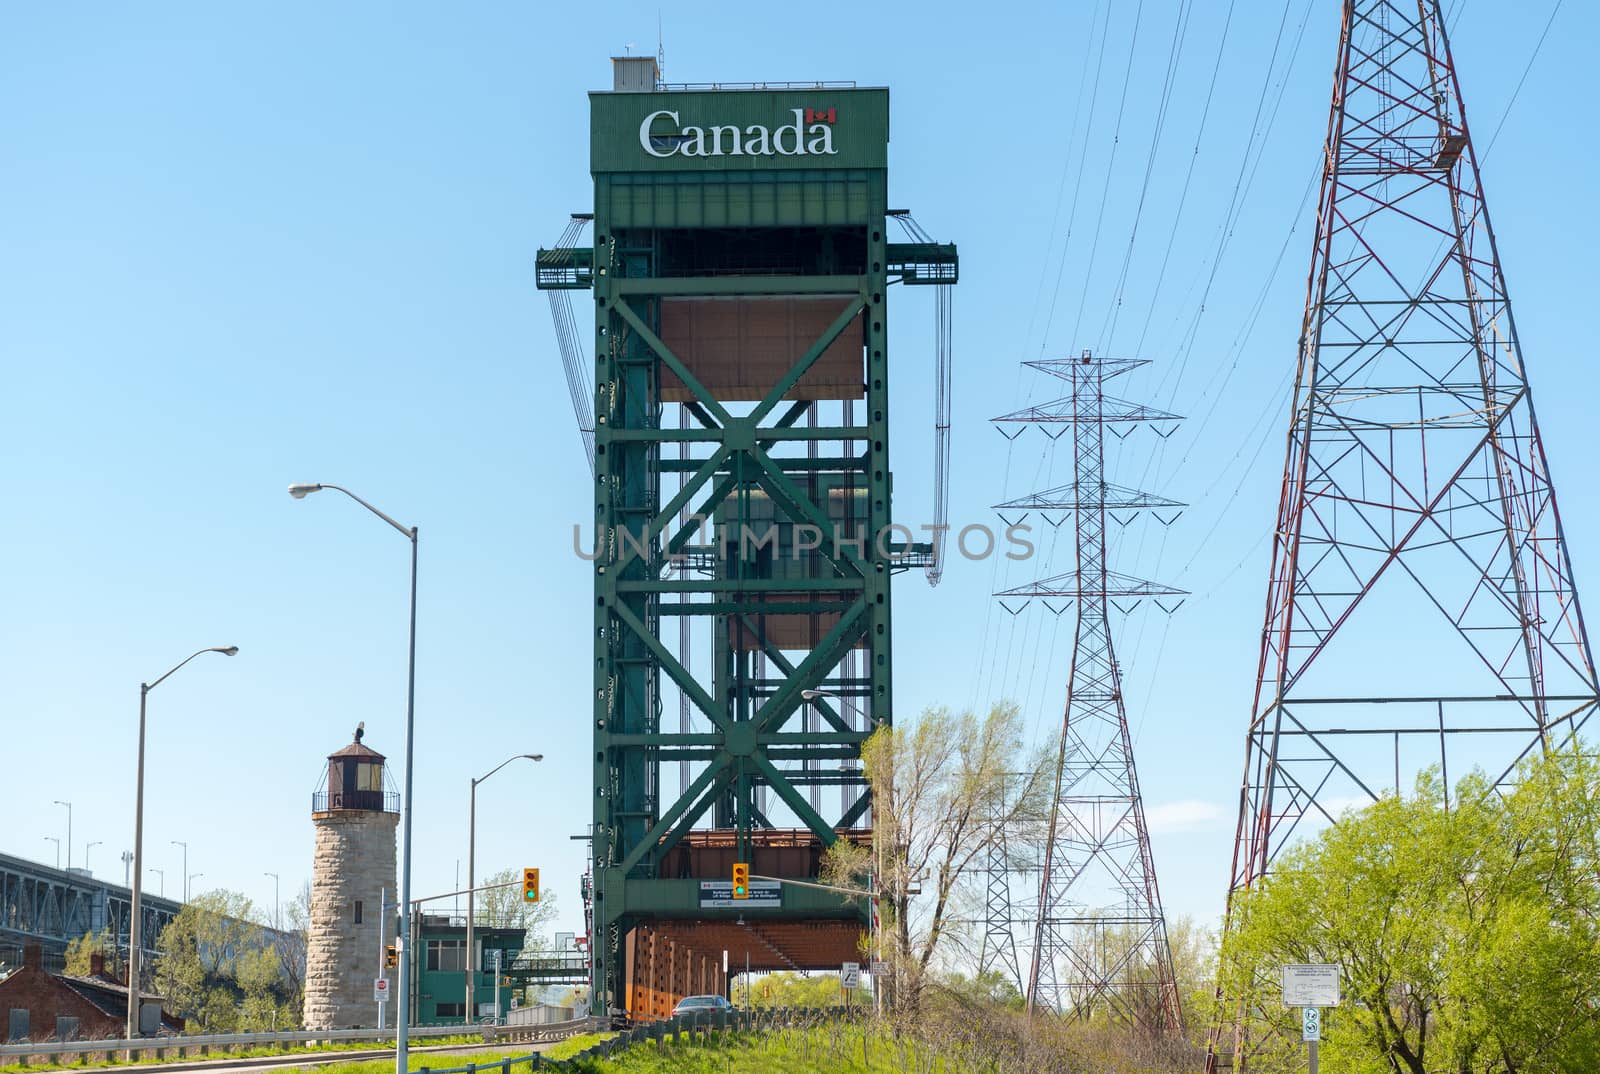 The Burlington Canal Lift Bridge is located on the western shore of Lake Ontario. The bridge spans the Burlington Canal that was opened in 1826. The bridge structure is a tower driven, vertical lift and moveable bridge. The lift span is 116 metres long, weighs 1,996 tonnes and has a vertical lift of 33.5 metres.